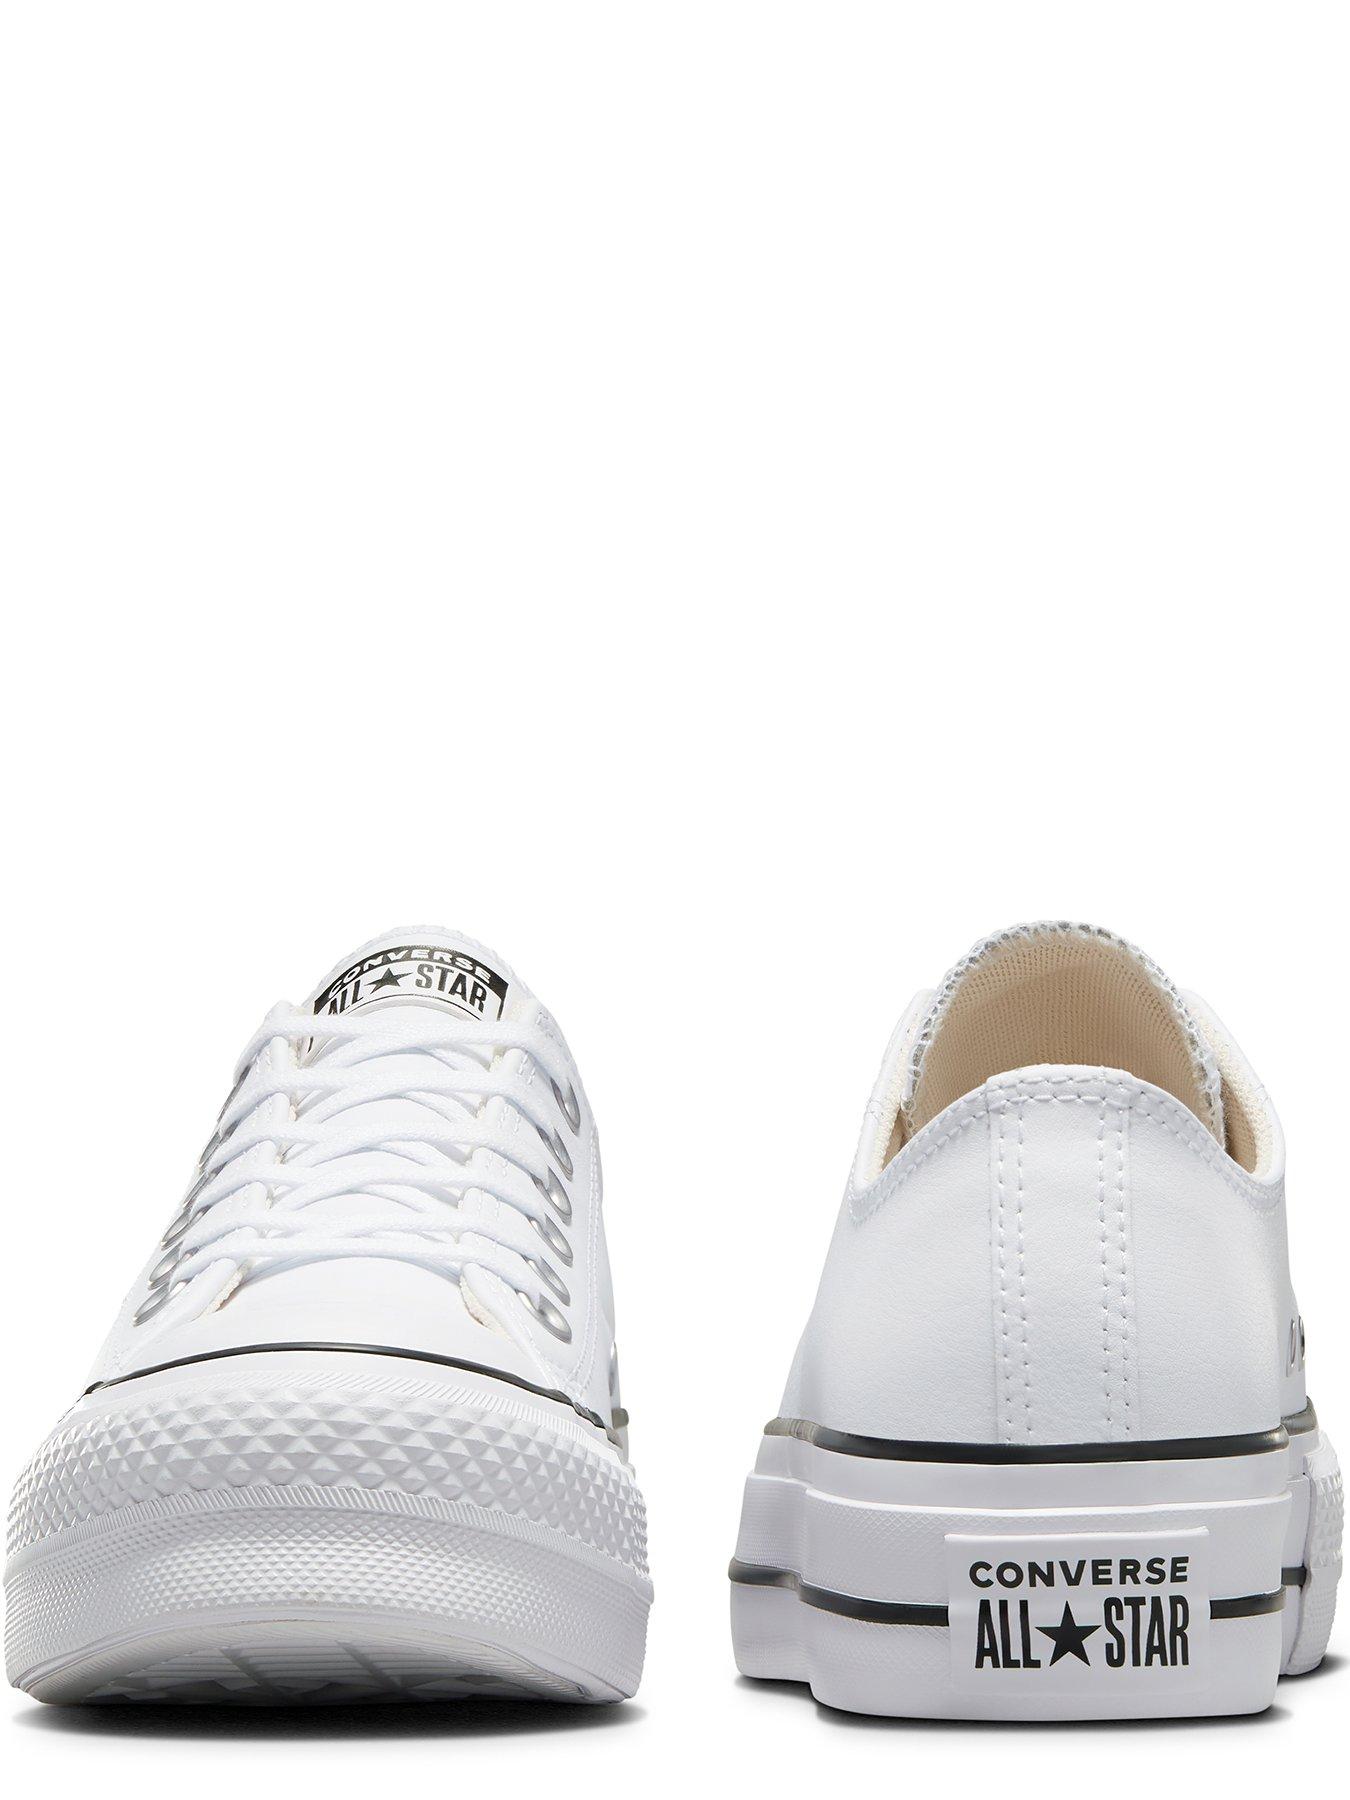 white leather converse lift